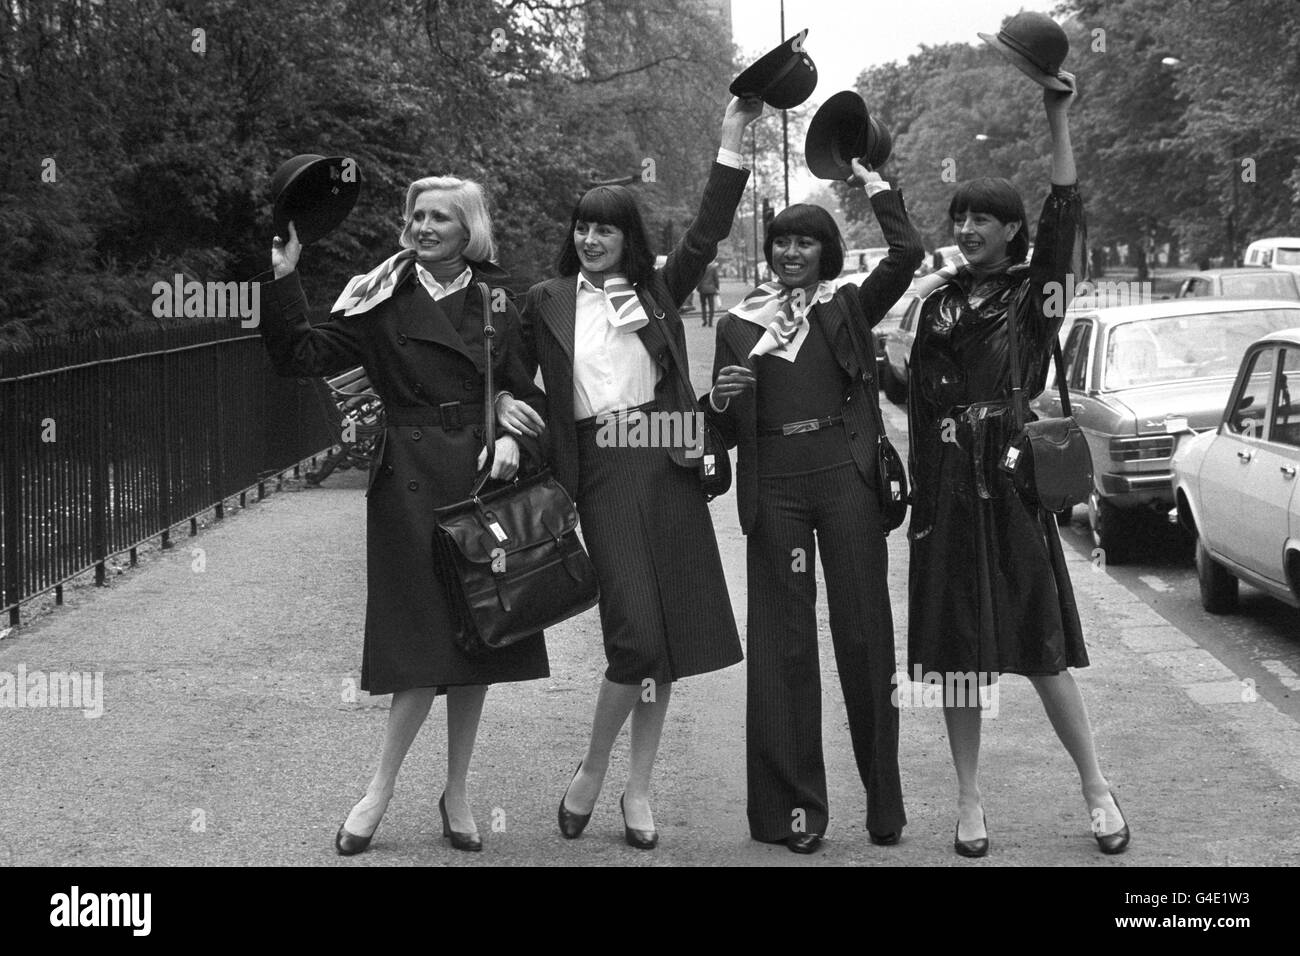 British Airways girls (l-r) Myrtle Winston, Diane Edmunds, Anna Pugin and Chris Harris displaying some of the items from a new wardrobe designed by Baccarat, the British fashion house, for ground and air girls worldwide. The wardrobe includes elegant dark blue pinstripe suits, a belted trench coat, silk scarves bearing the British Airways symbol, and a stowaway raincoat with detachable hood. The uniform is enhanced by a small brimmed hat. Stock Photo